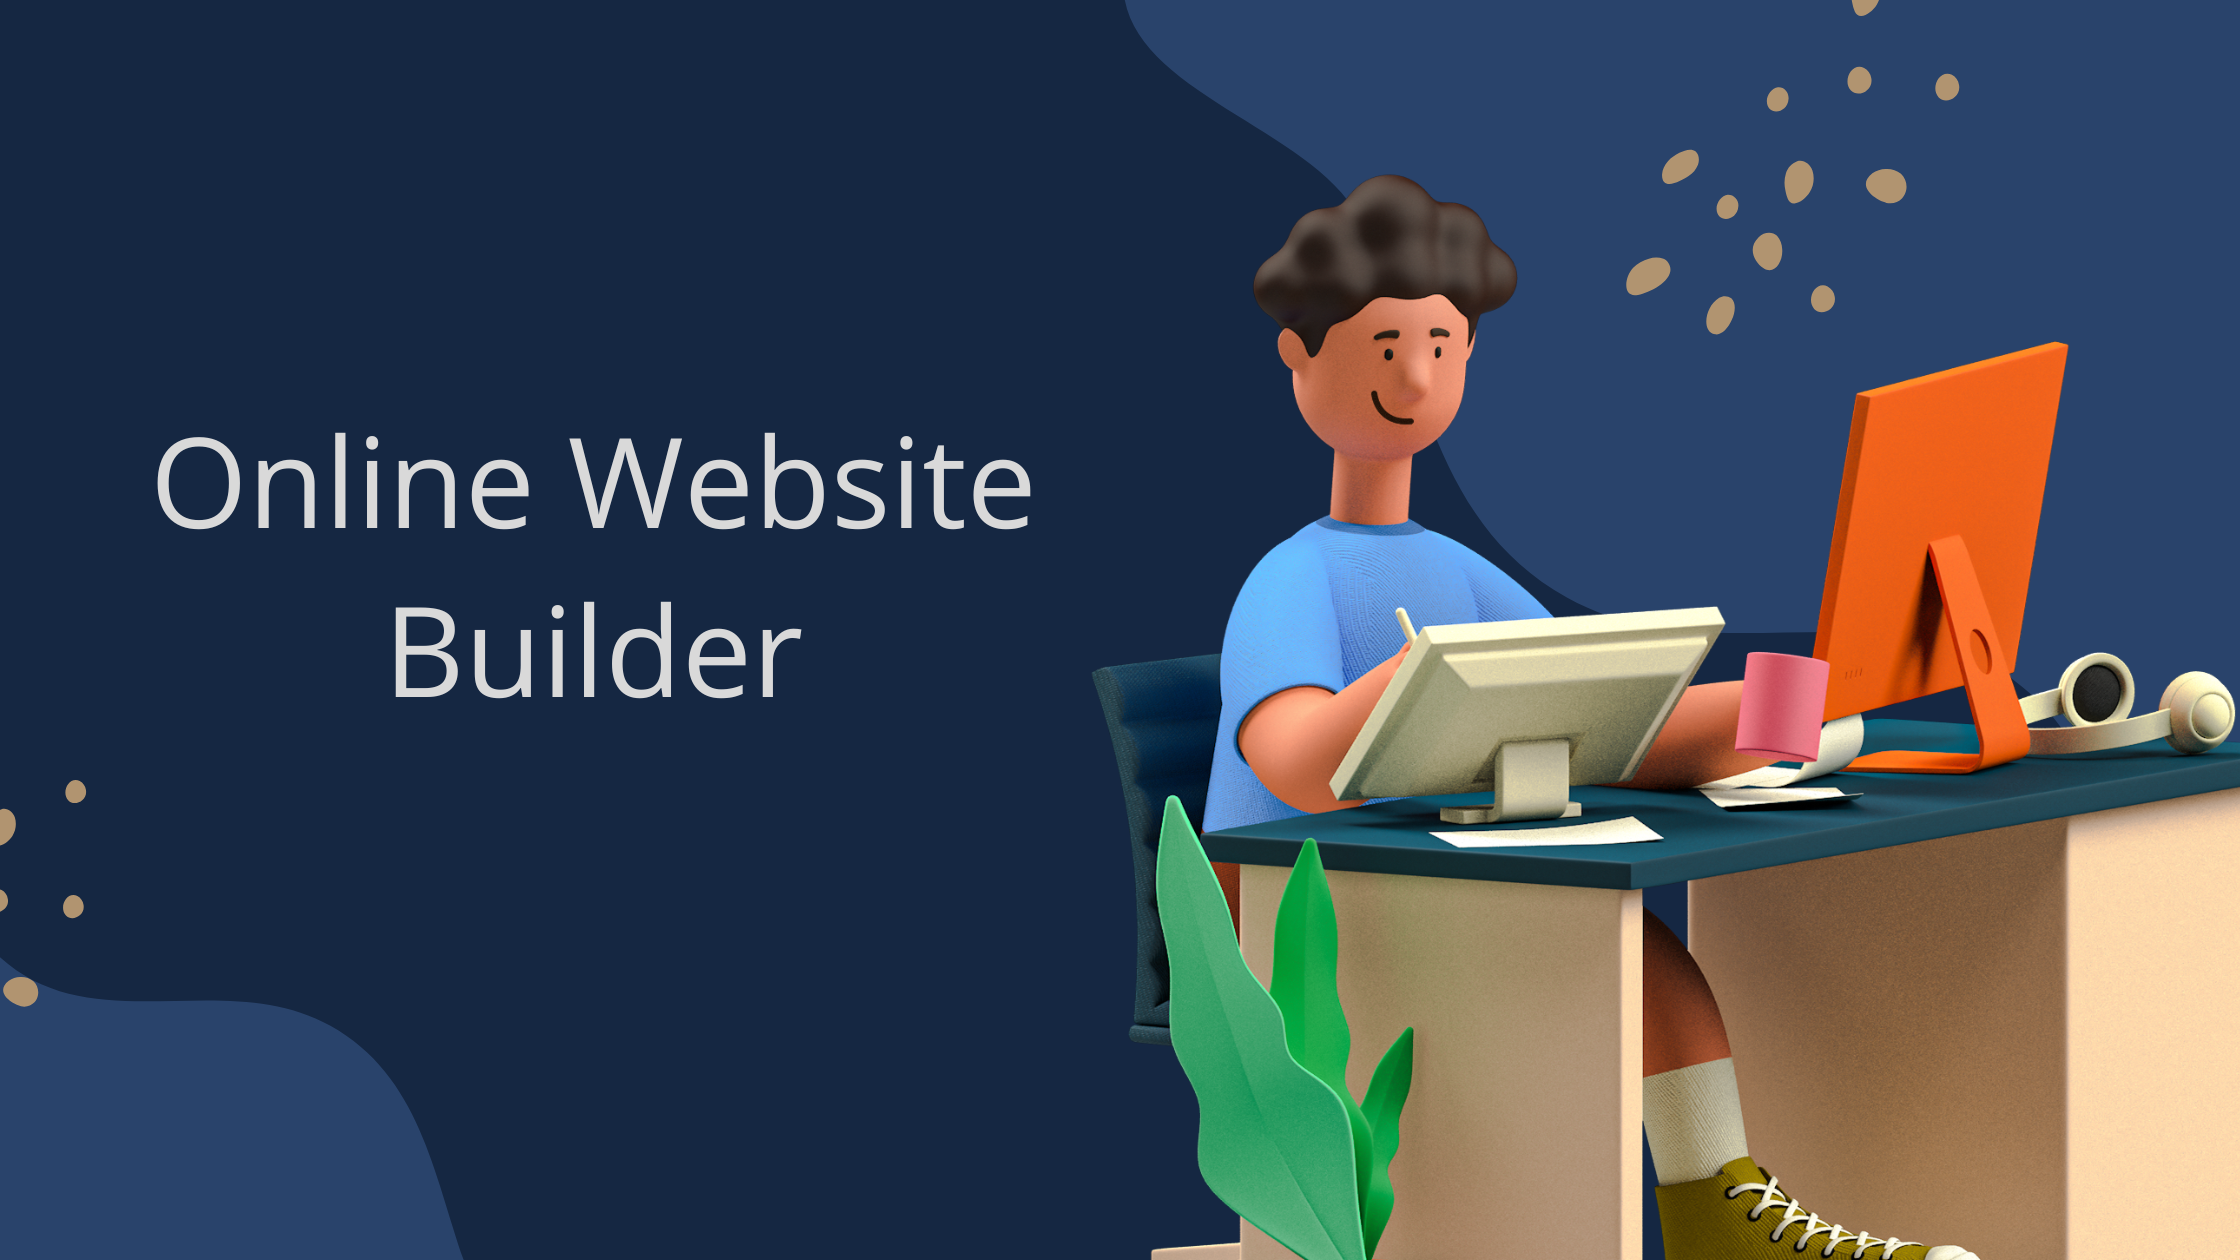 Features to Look for in an Online Website Builder